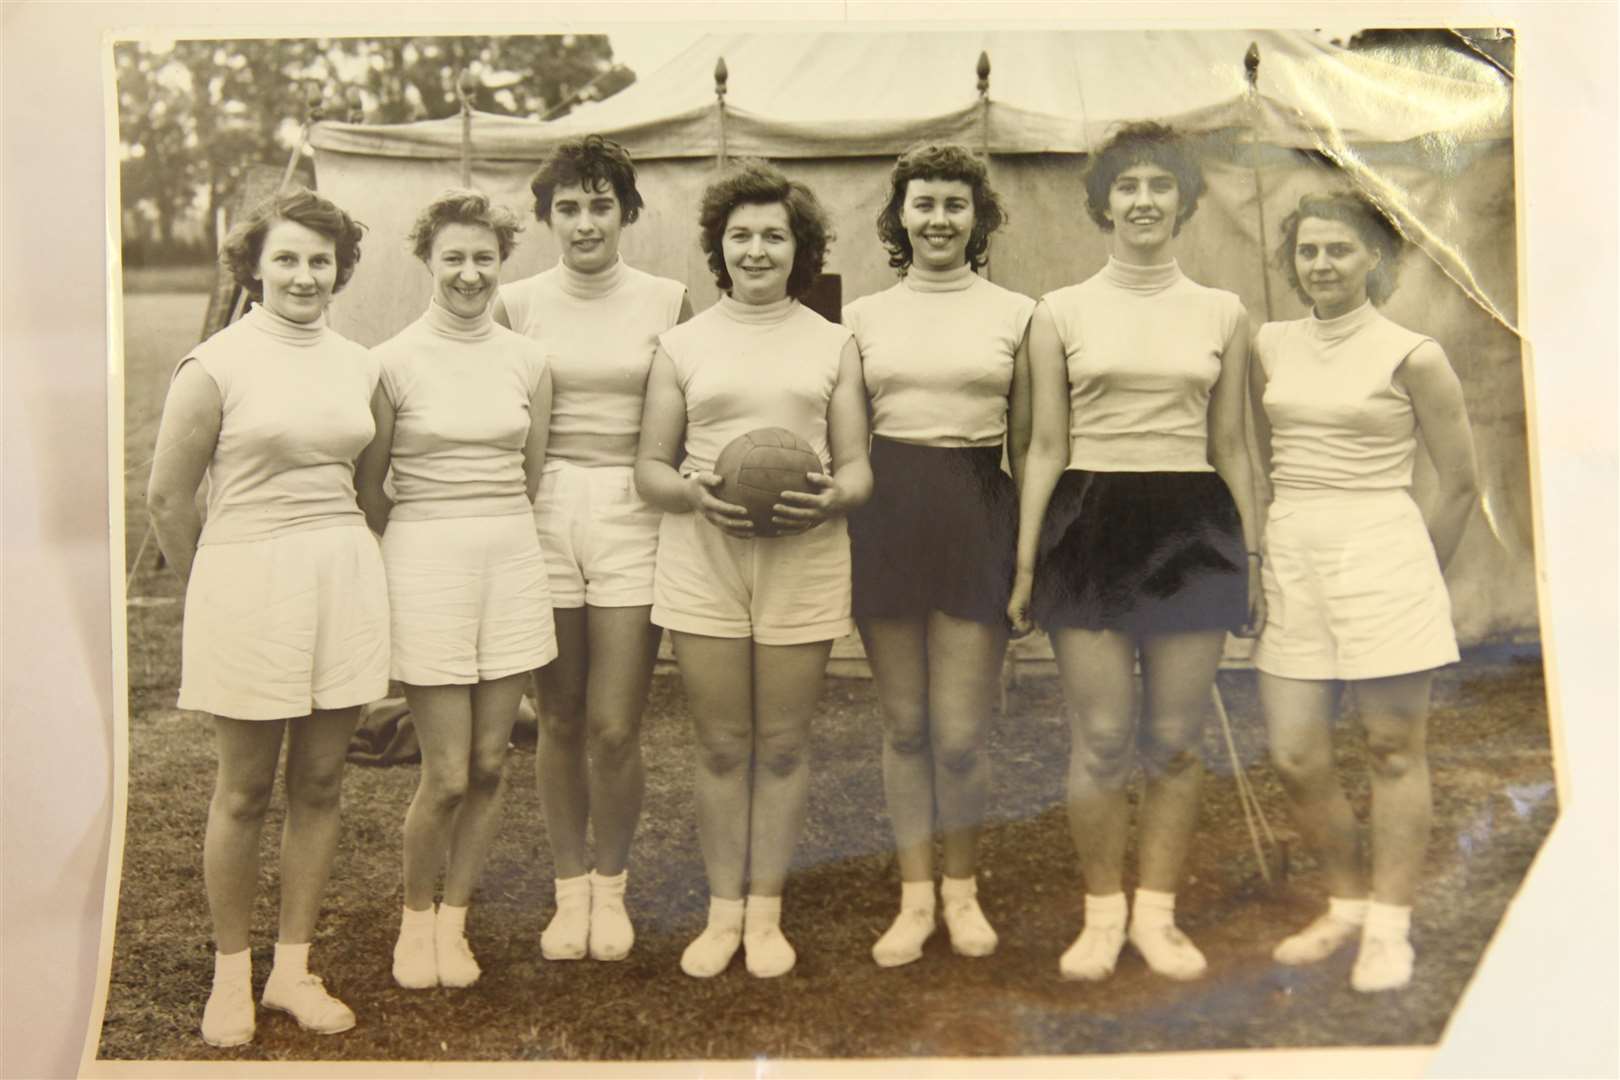 Pam Woolmer seen in this photograph front centre (holding the ball with the Borstal Ladies team, taken about 1956. From left: Margery Turner, Dorothy Dinnie, Sheila (surname unknown), Pam Woolmer, next two names unknown, Daphne Rowley. This was one of many photos in Pam's collection